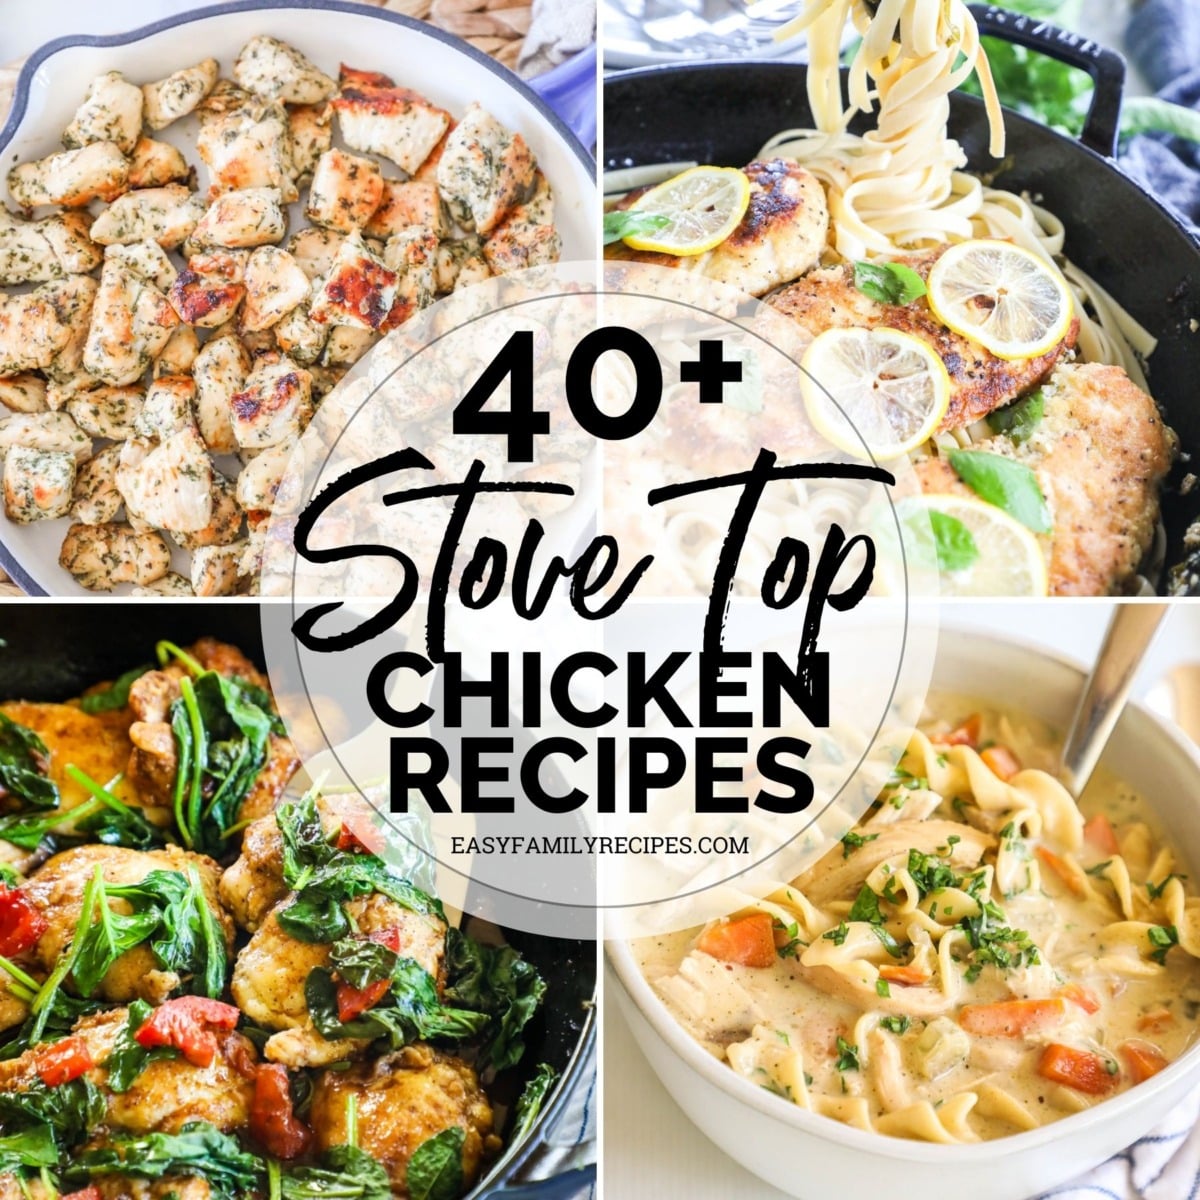 40+ Stove Top Chicken Recipes